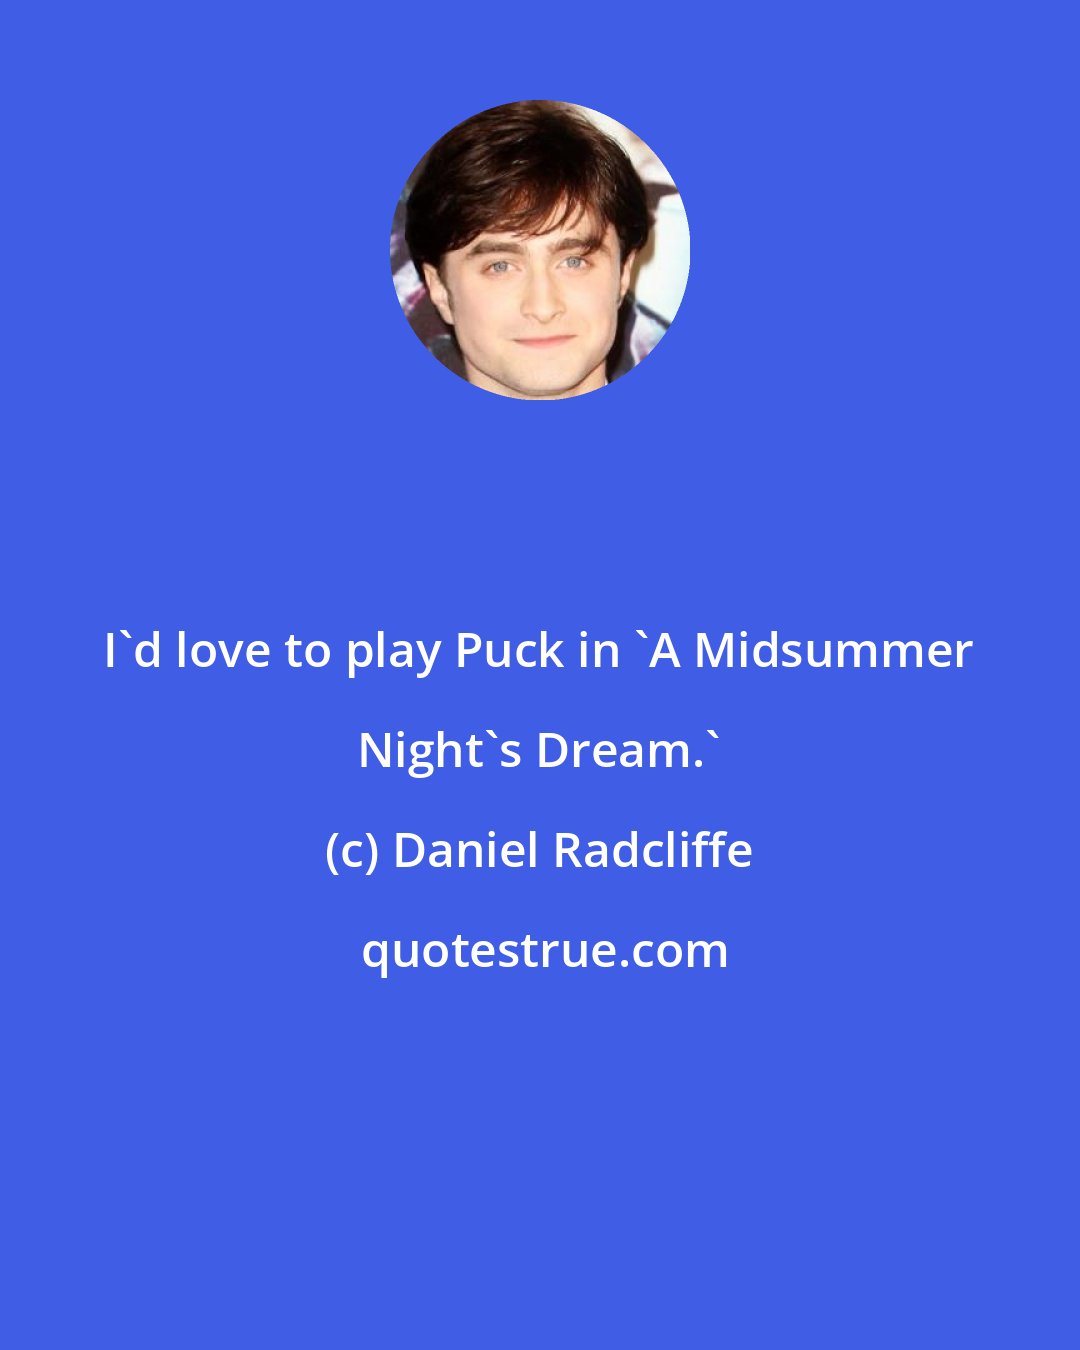 Daniel Radcliffe: I'd love to play Puck in 'A Midsummer Night's Dream.'